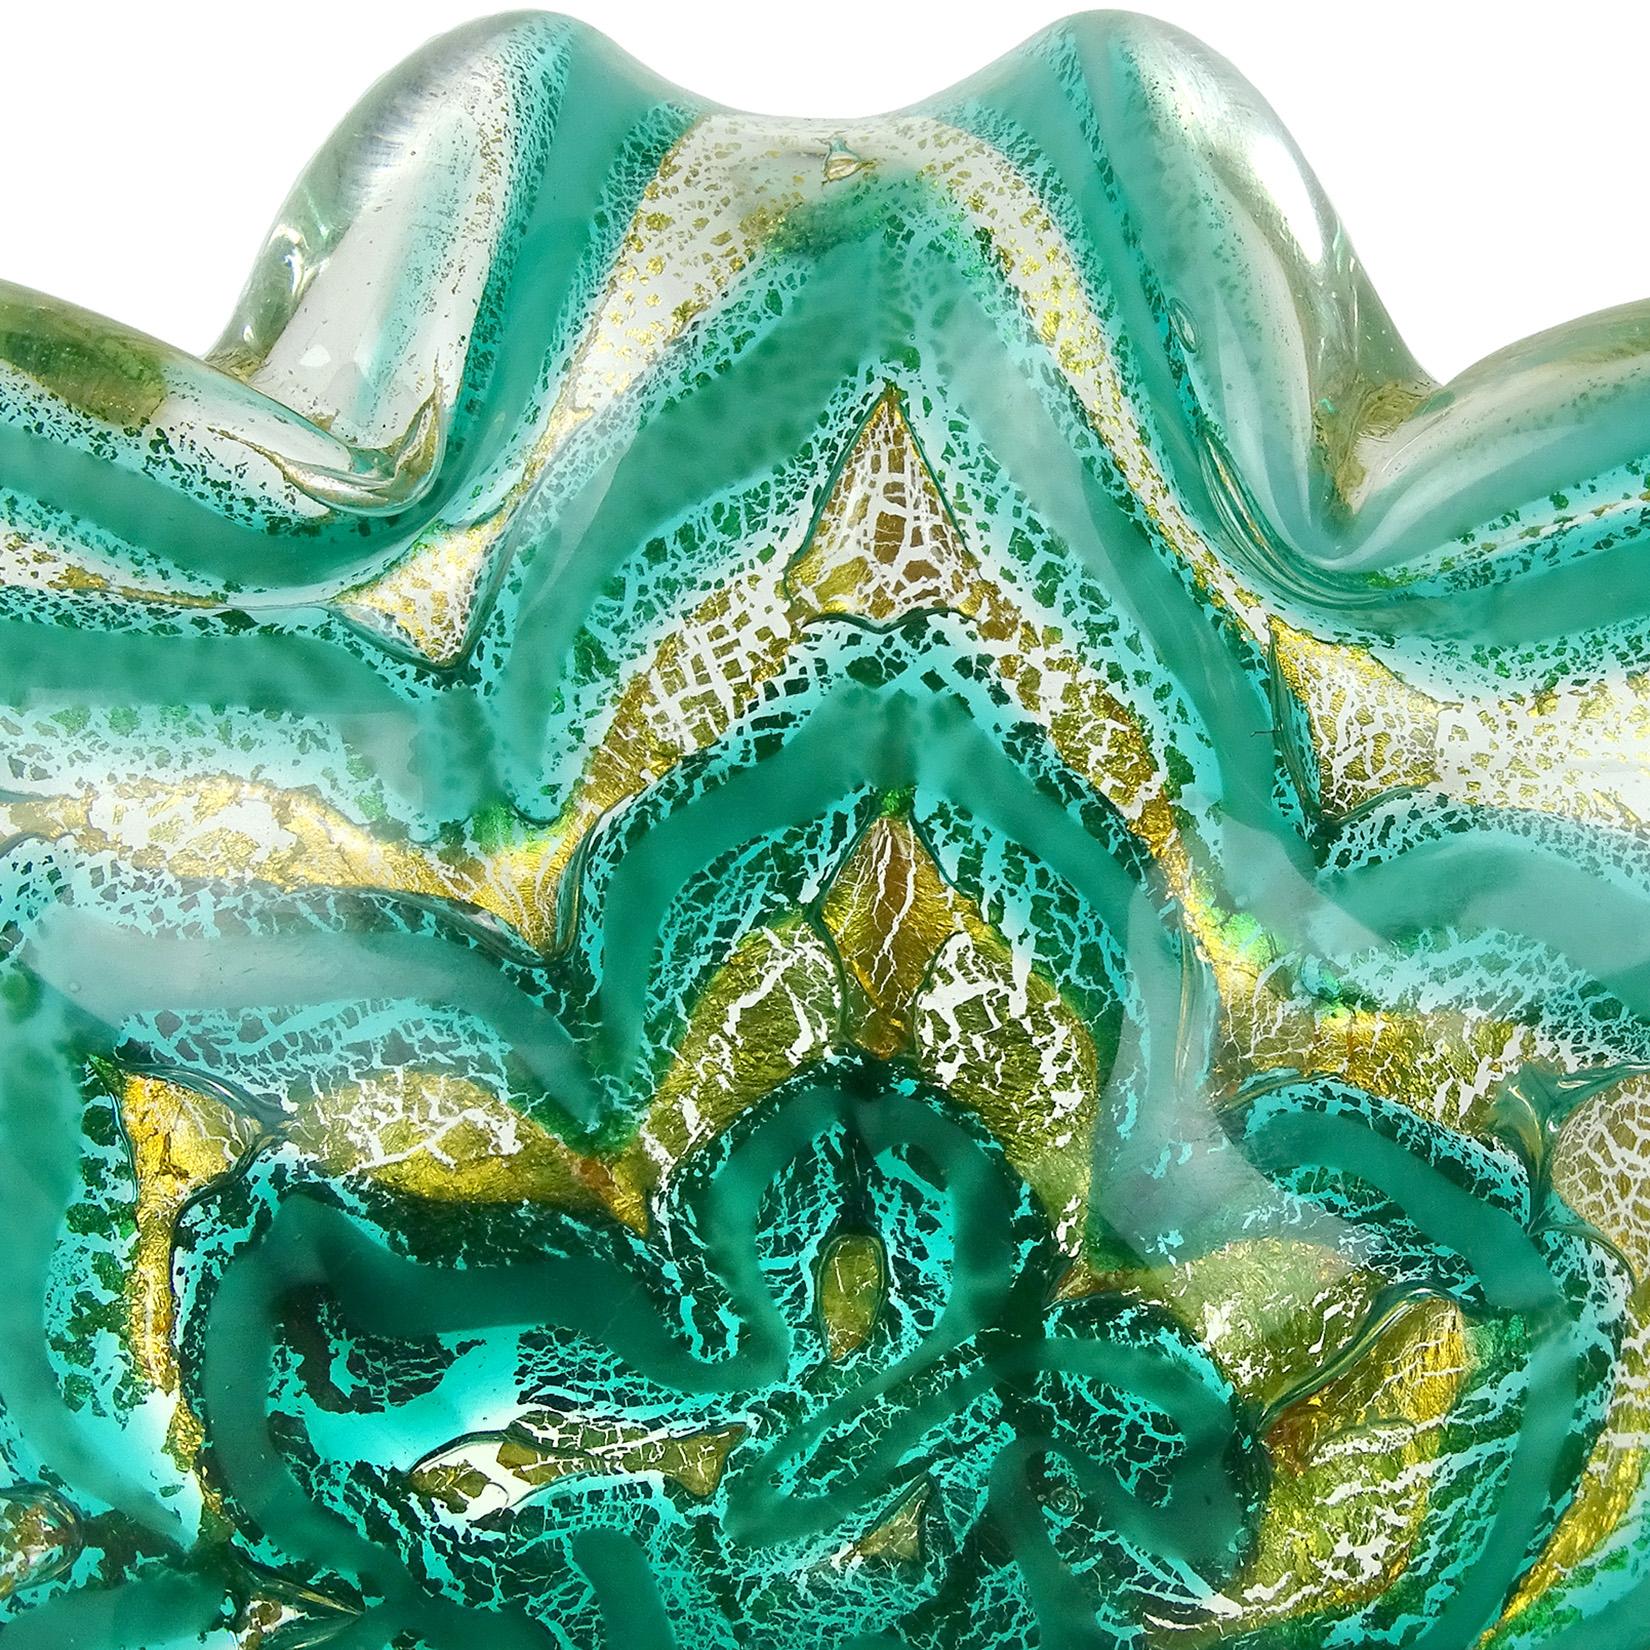 Hand-Crafted Barovier Toso Murano Green Gold Flecks Italian Art Glass Decorative Flower Bowl For Sale